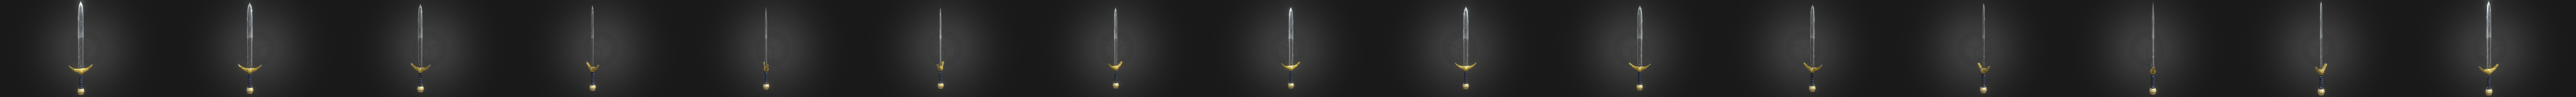 Roblox Linked Sword Remaster Download Free 3d Model By Sir Numb Sirnumb 0326504 - white sword roblox